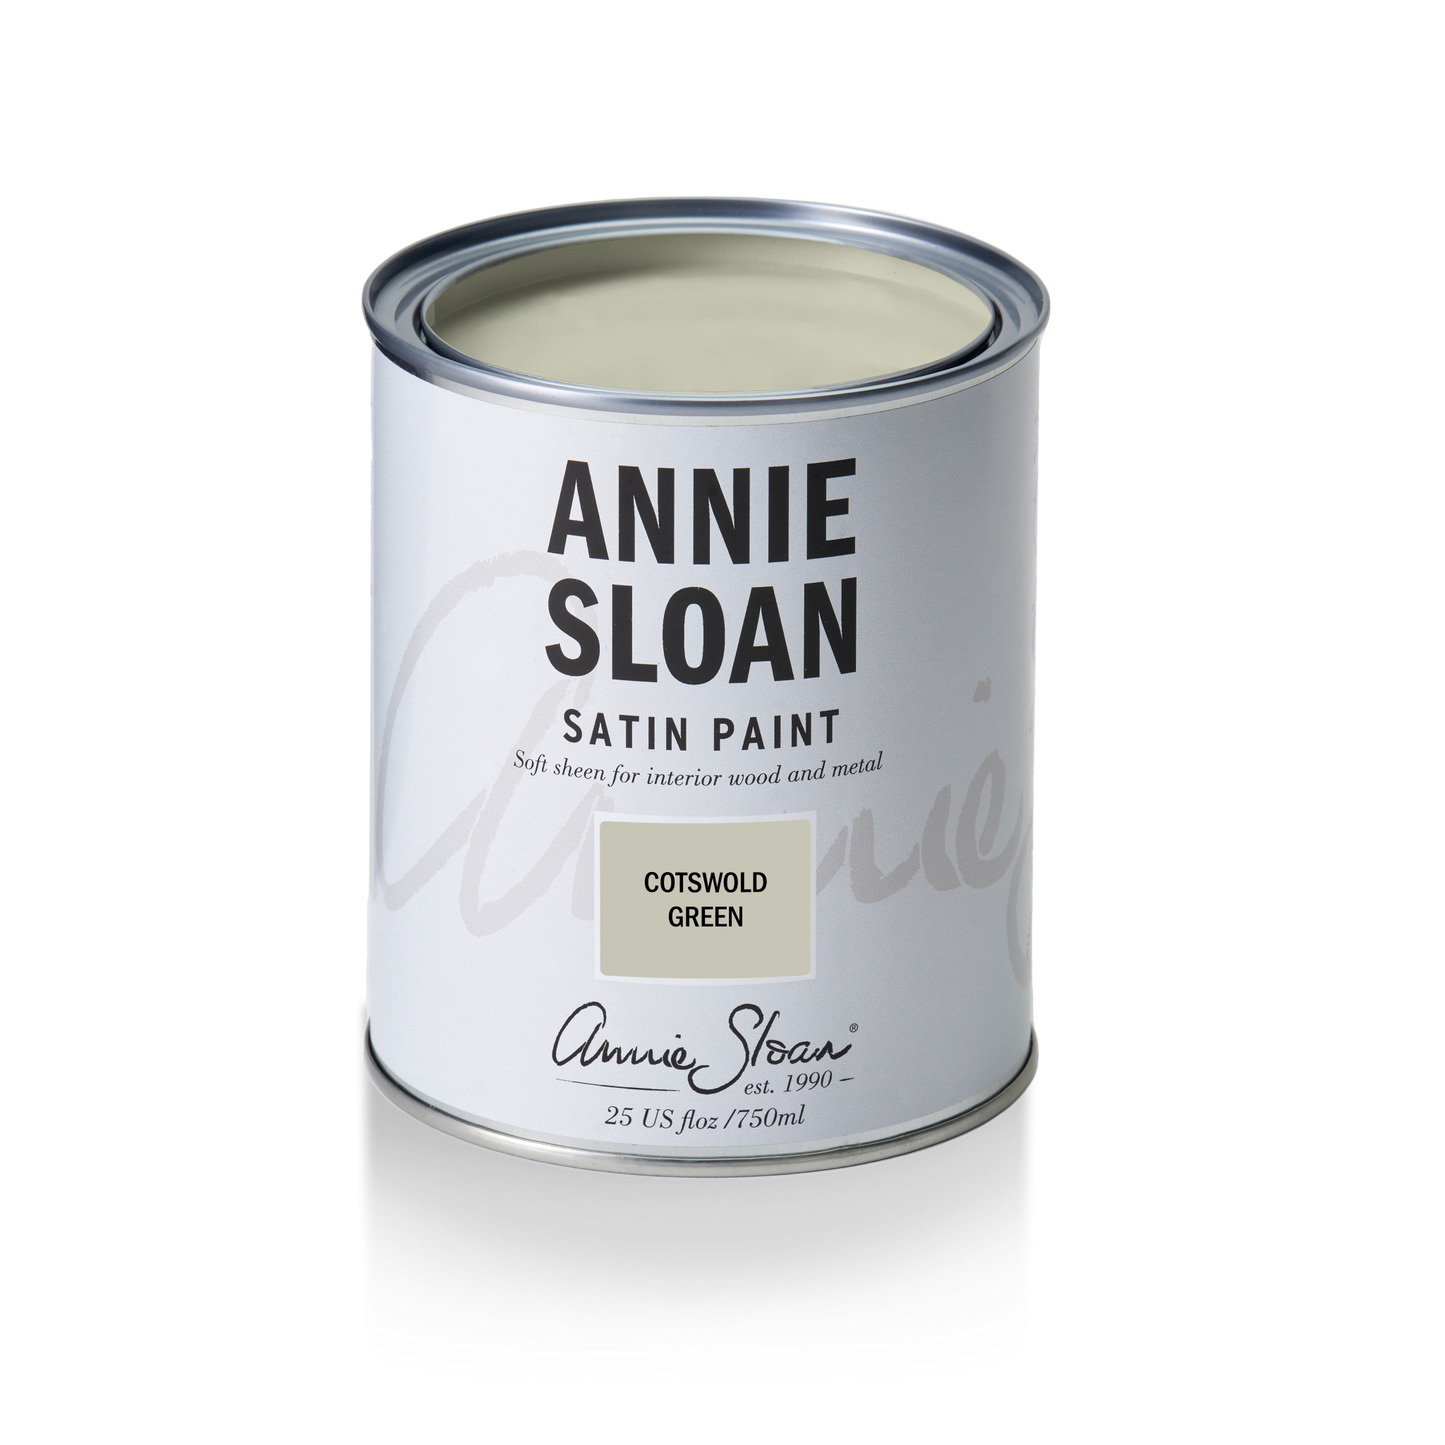 Annie Sloan Satin Paint Cotswold Green, 750 ml Tin